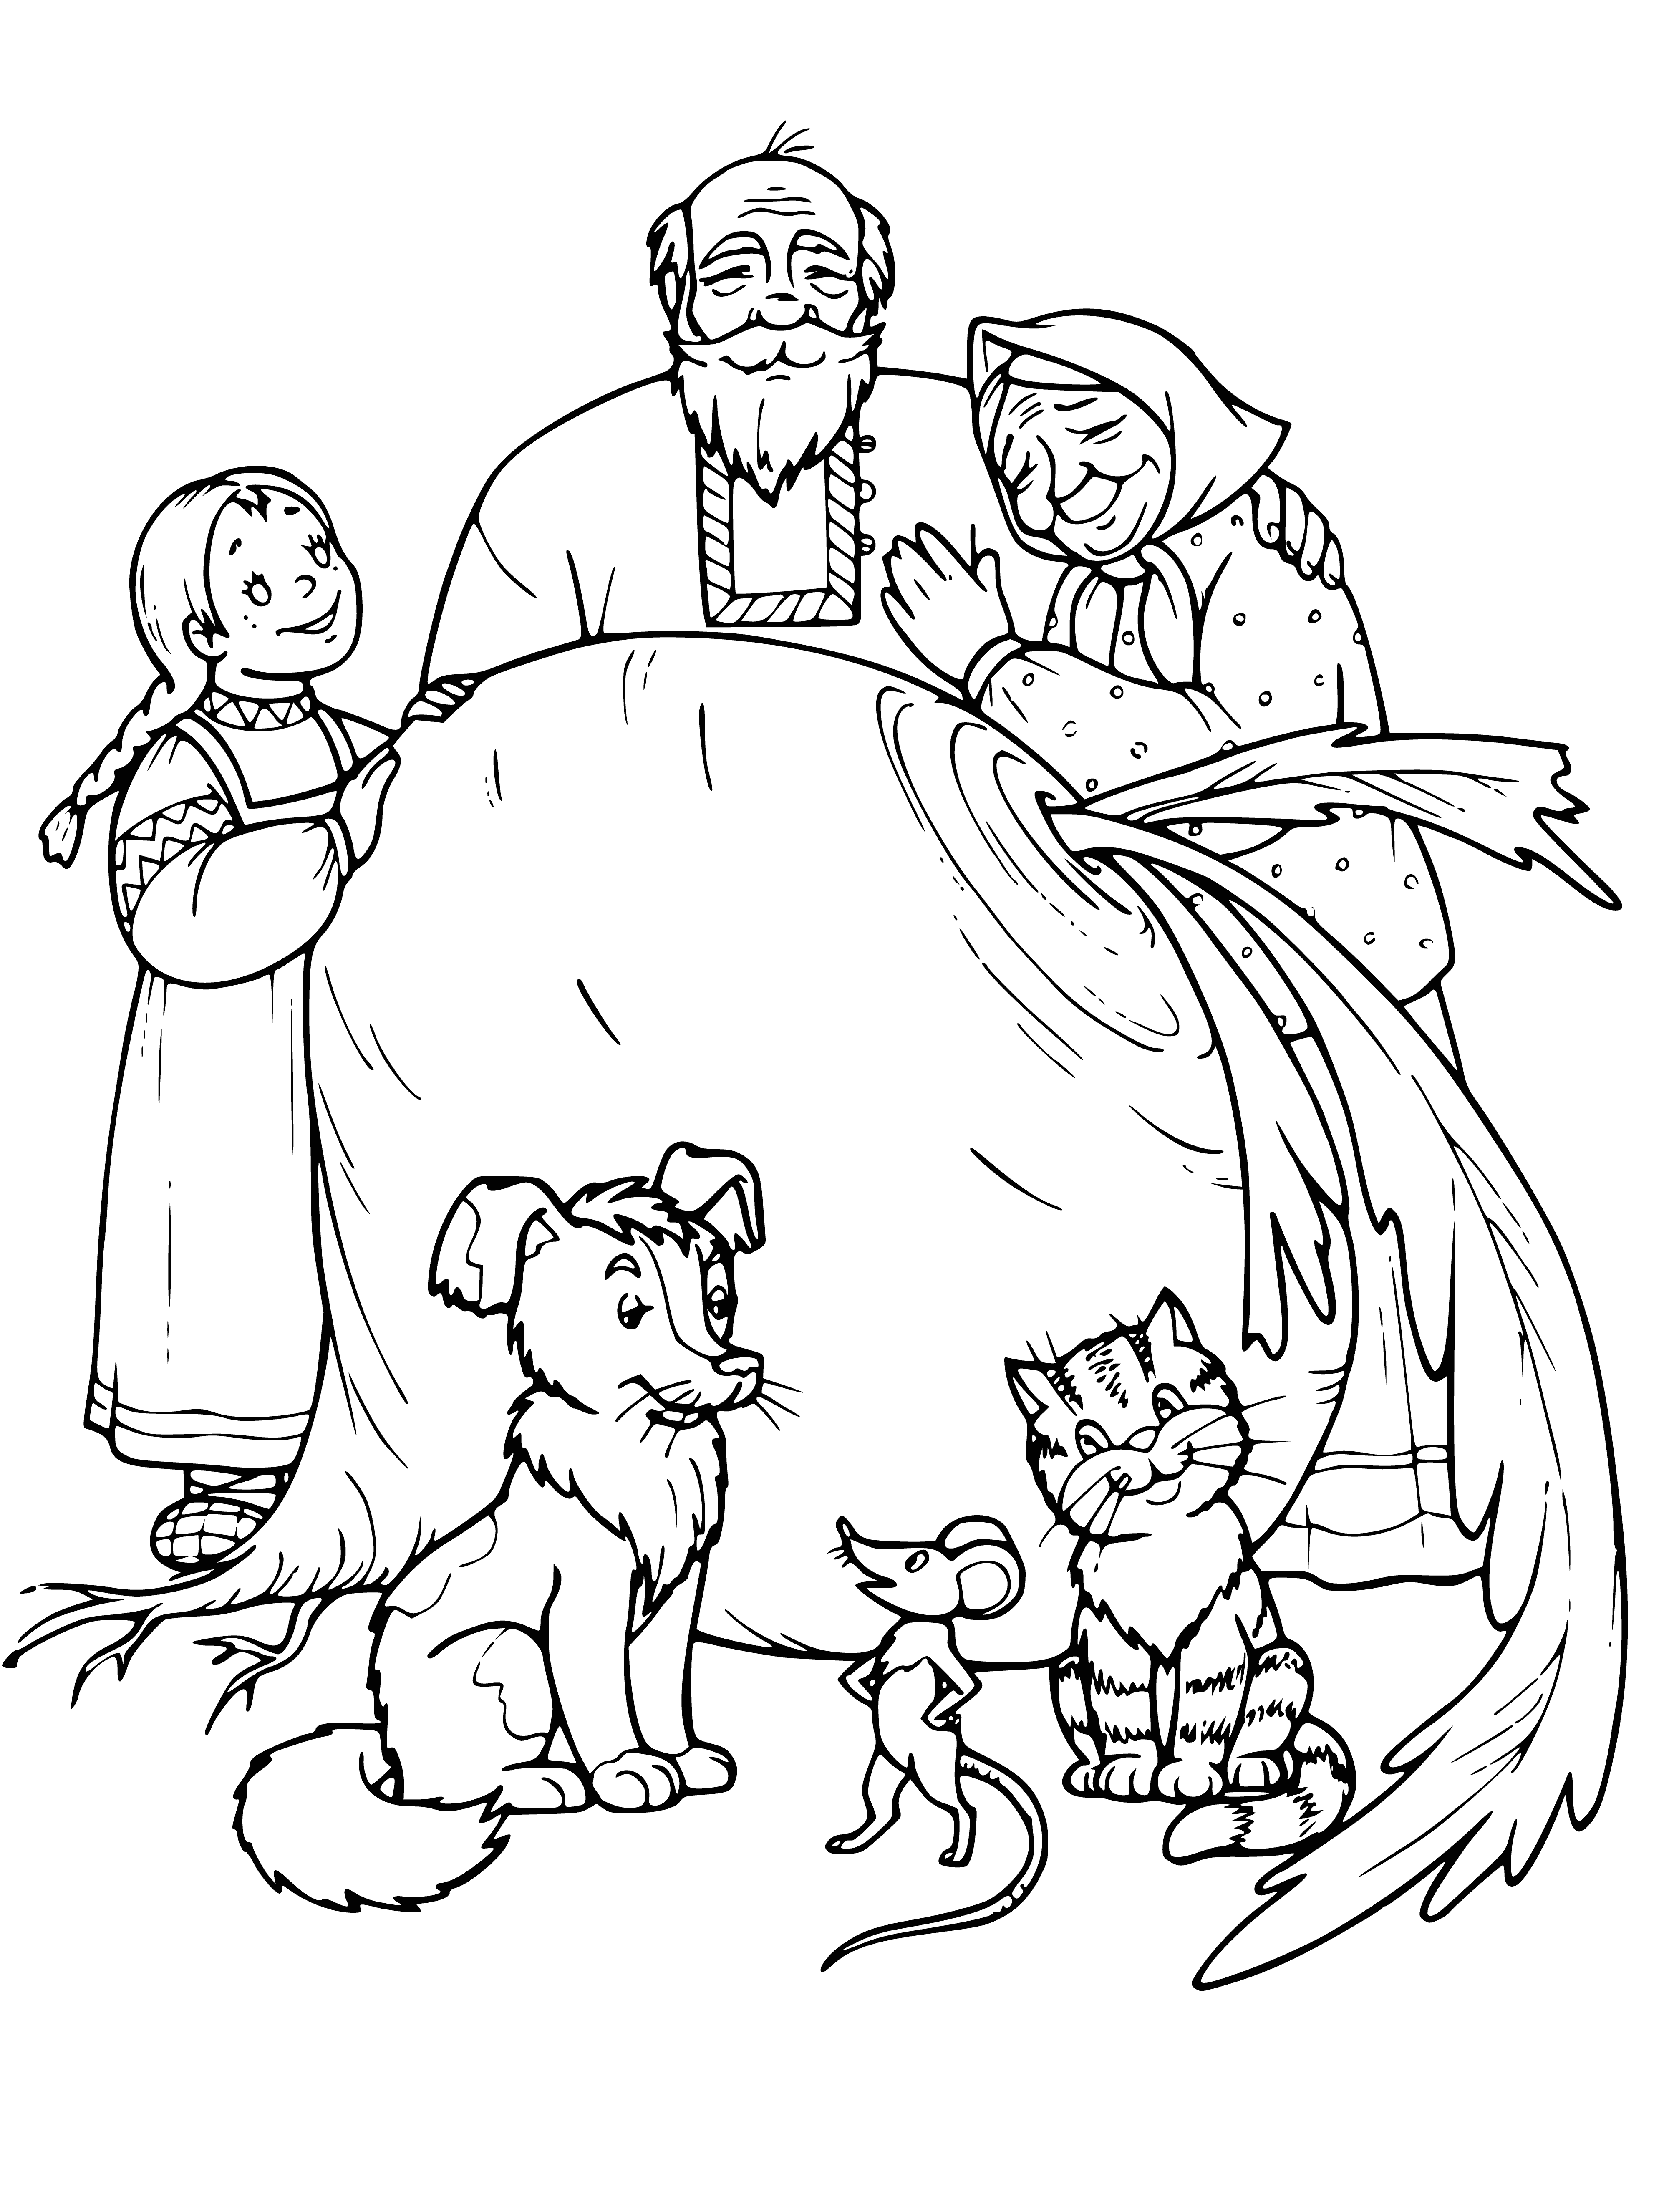 coloring page: A young girl embarks on an enchanted adventure in a magical forest to save her village from a disease. With help from strange creatures, she succeeds in finding the cure.